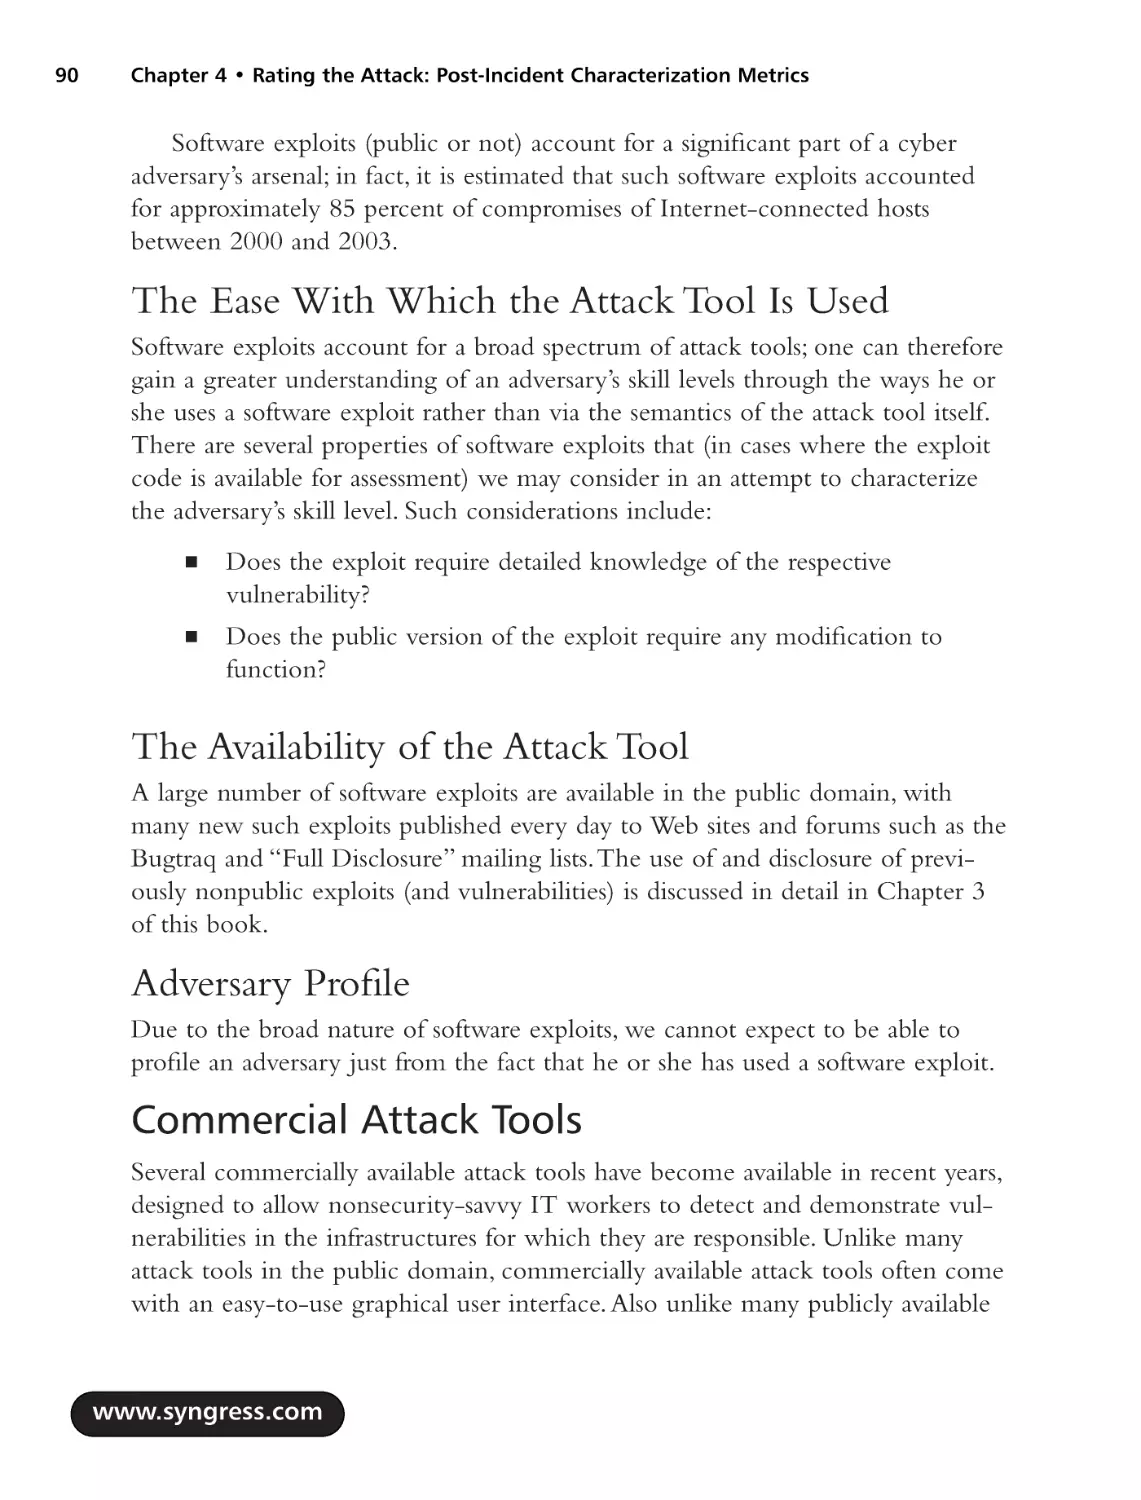 The Ease With Which the Attack Tool Is Used
The Availability of the Attack Tool
Adversary Profile
Commercial Attack Tools